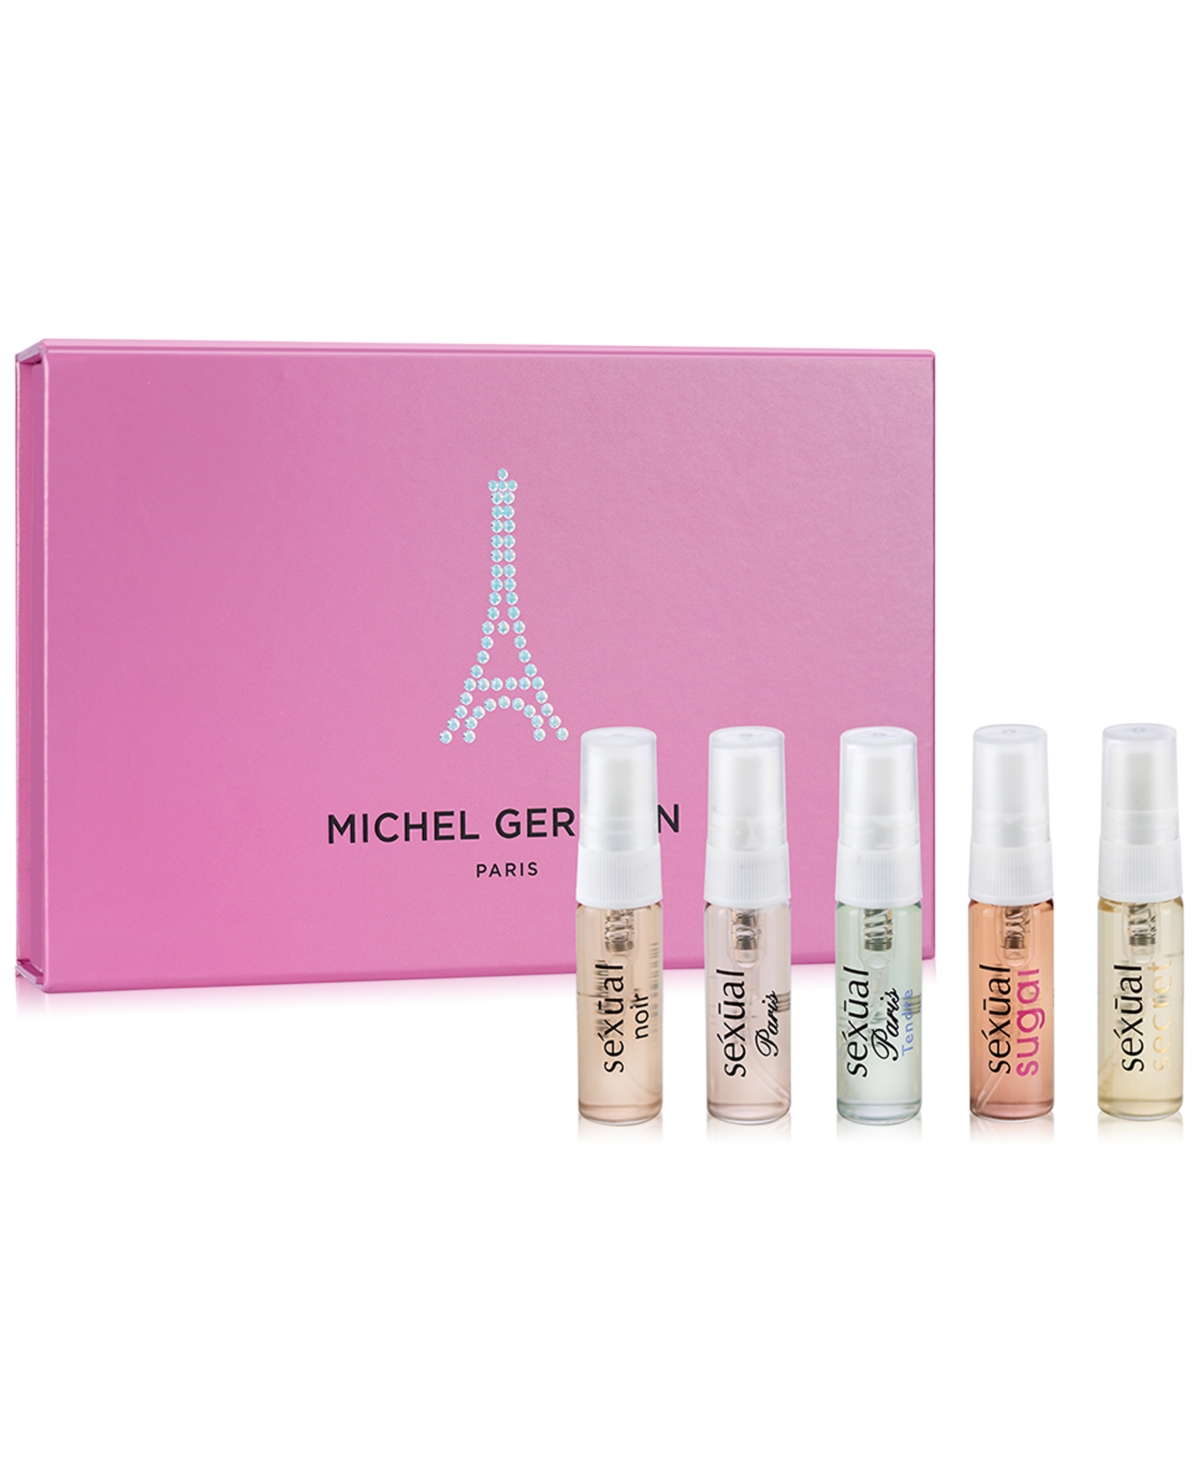 Michel Germain 5-Pc. Discovery Set For Her, First at Macy's